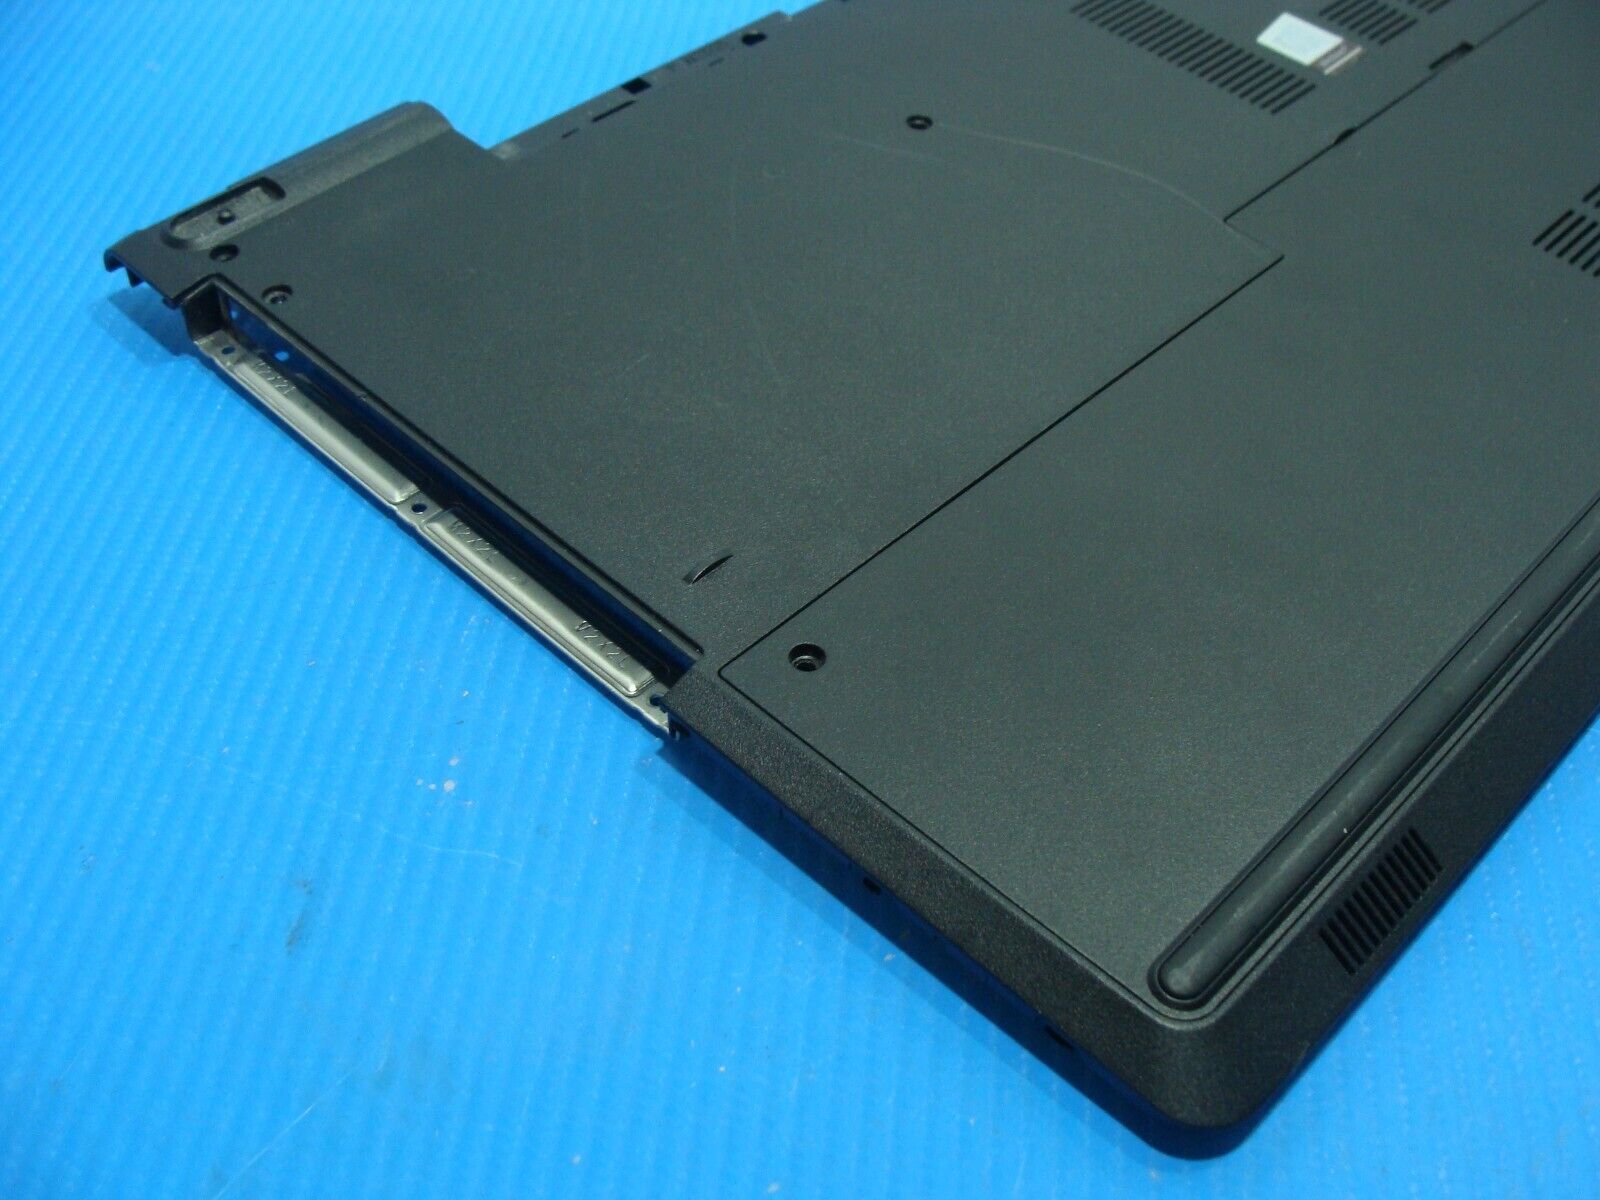 Dell Inspiron 15.6” 15 5566 Genuine Laptop Bottom Case w/Cover Door 10F87 X3FNF